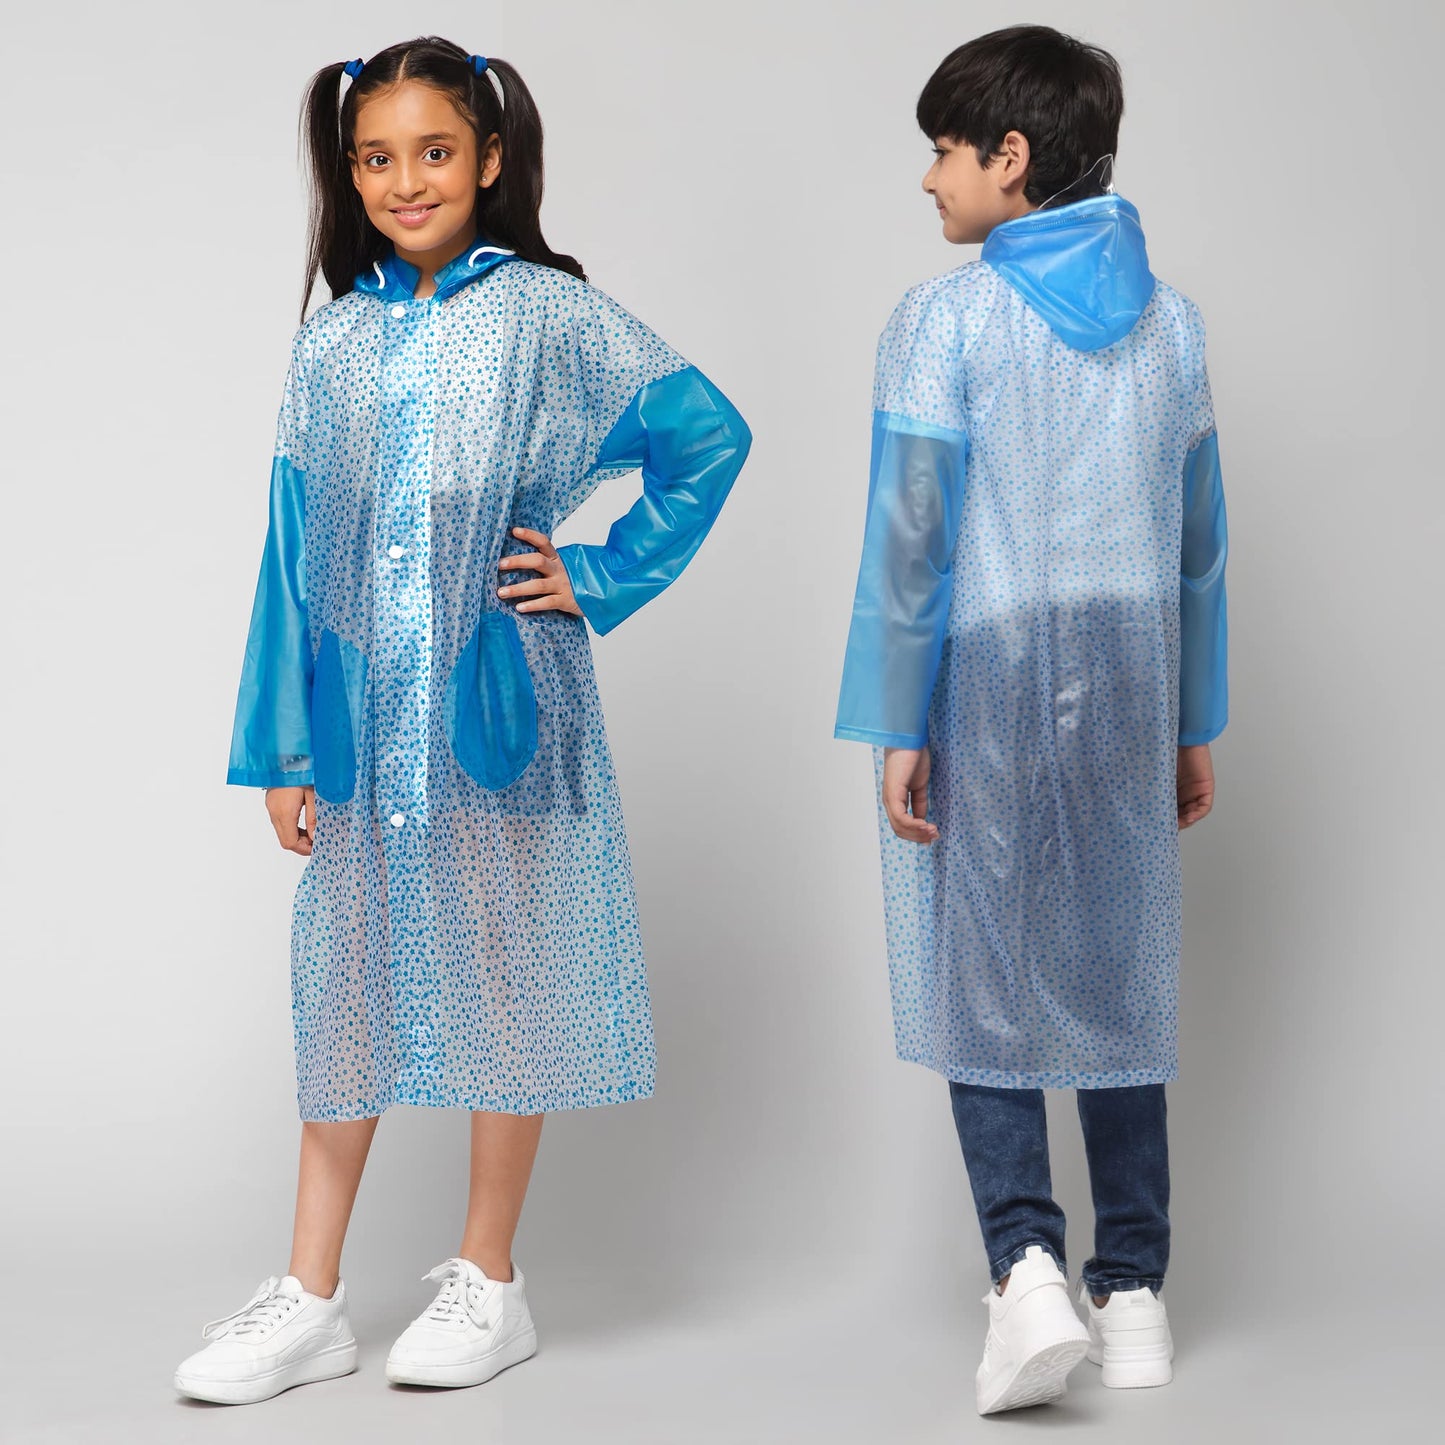 THE CLOWNFISH Drench Dew Series Unisex Kids Waterproof Single Layer PVC Longcoat/Raincoat with Adjustable Hood. Age-4-5 Years (Sky blue)